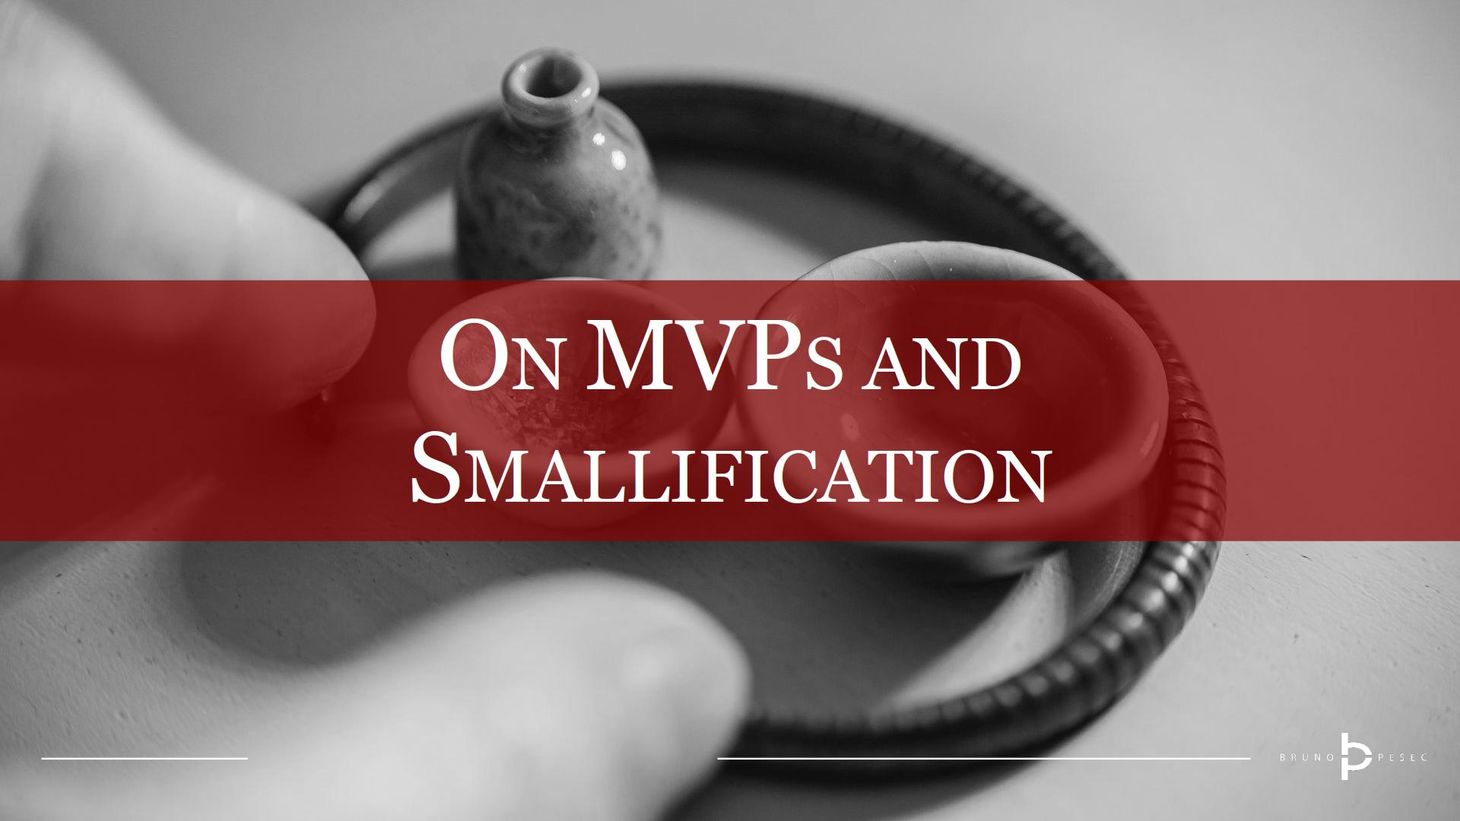 On MVPs and smallification